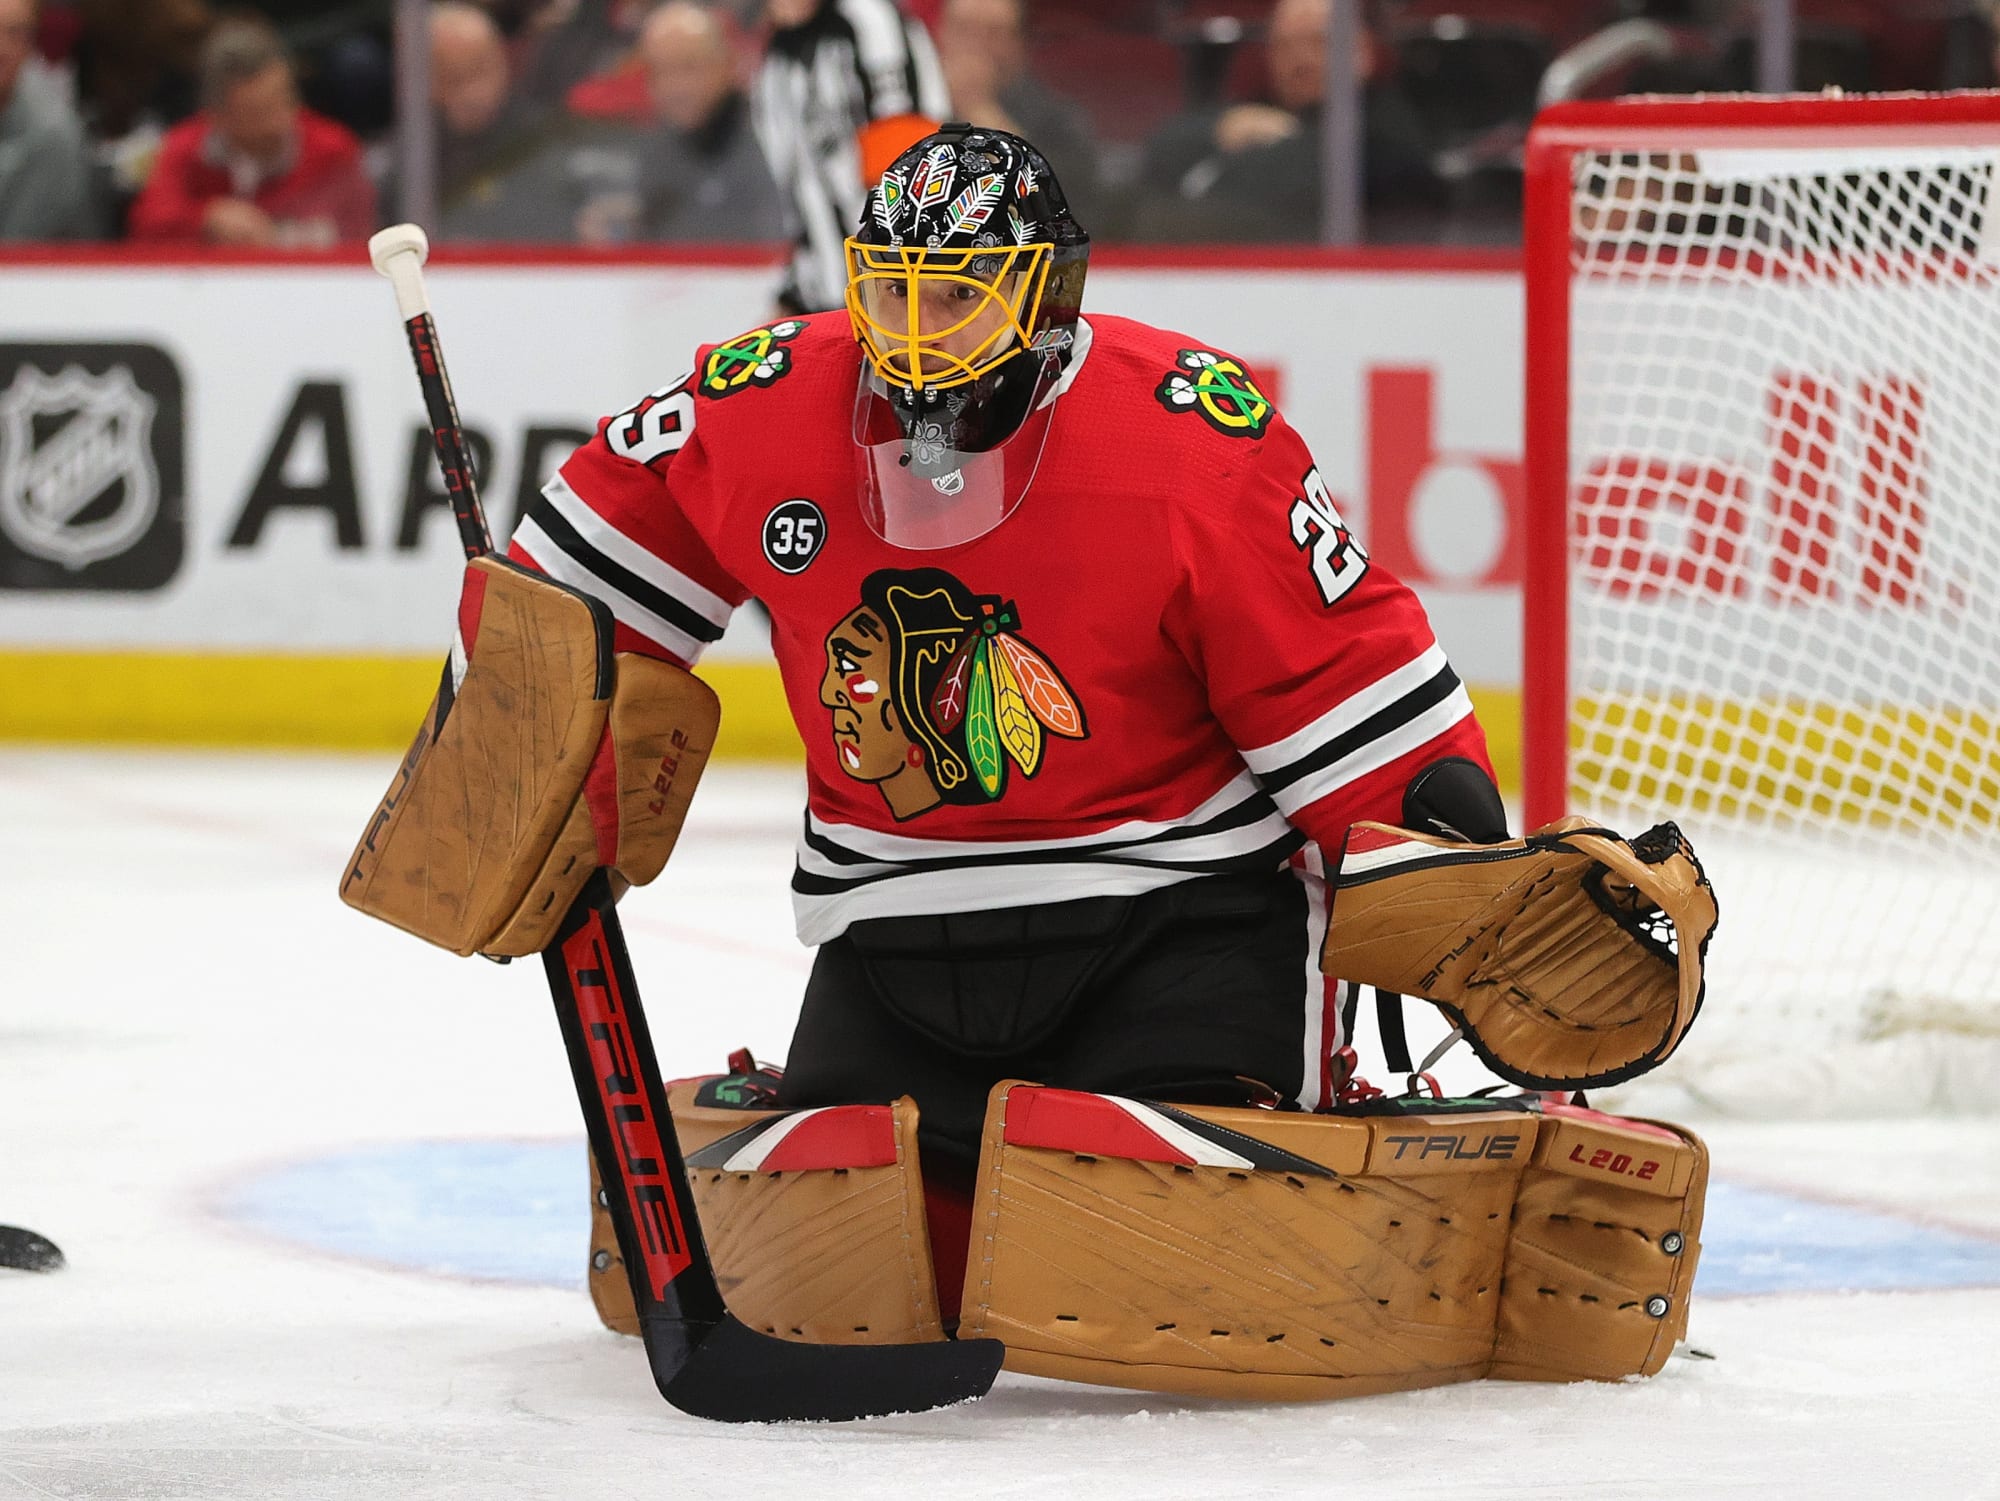 Marc-Andre Fleury plans on playing for Blackhawks post-trade